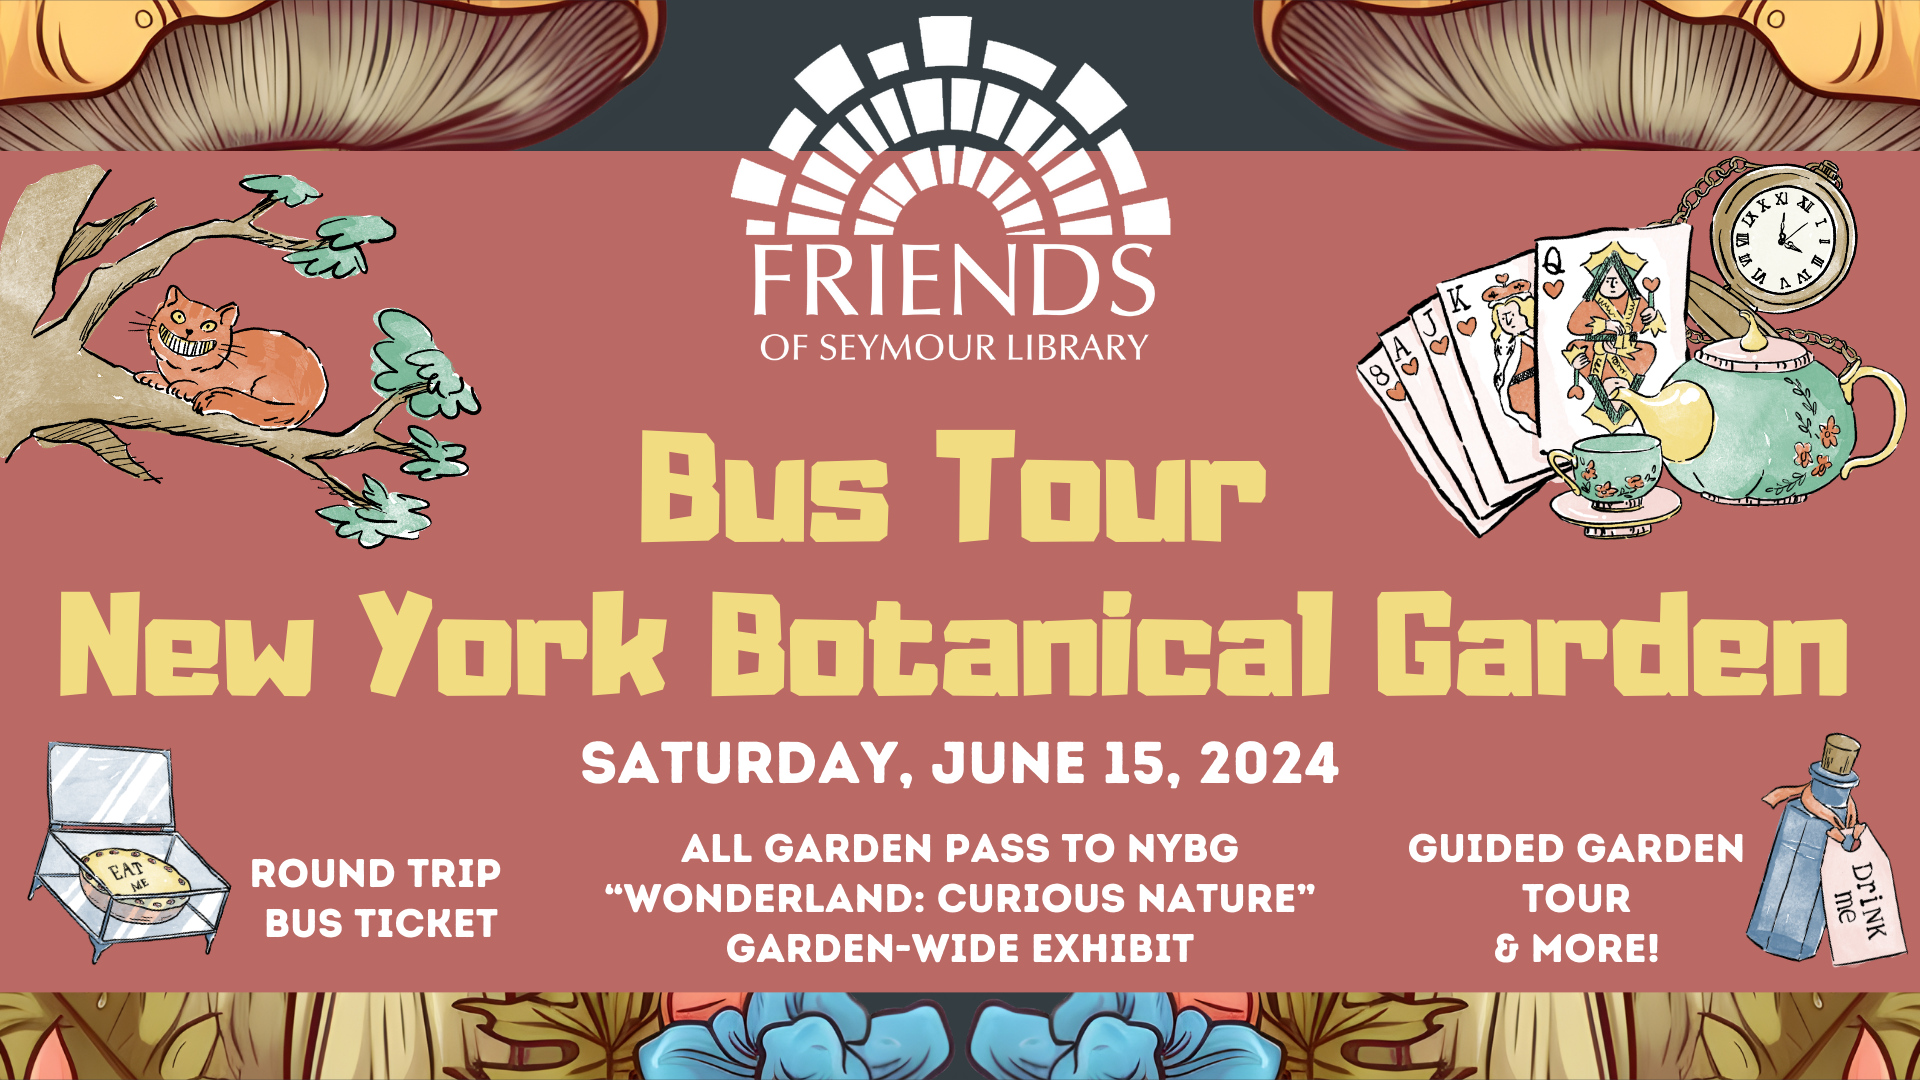 Friends of Seymour Library Bus Tour to New York Bontanical Gardens on June 15